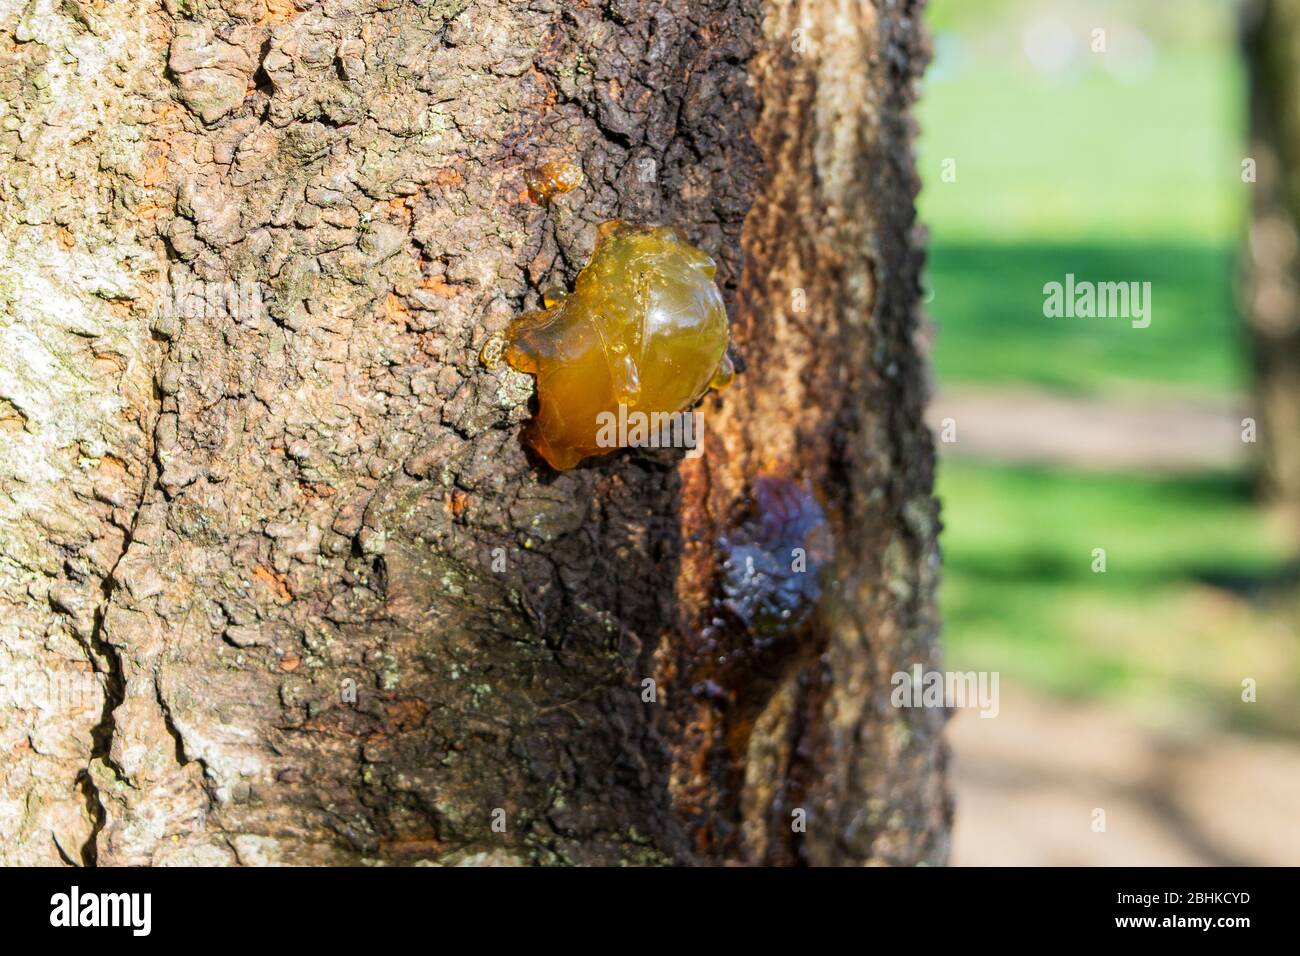 Sap, starting to go translucent, oozing from a cherry tree trunk most likely caused by bacterial or fungal canker a process known as gummosis Stock Photo